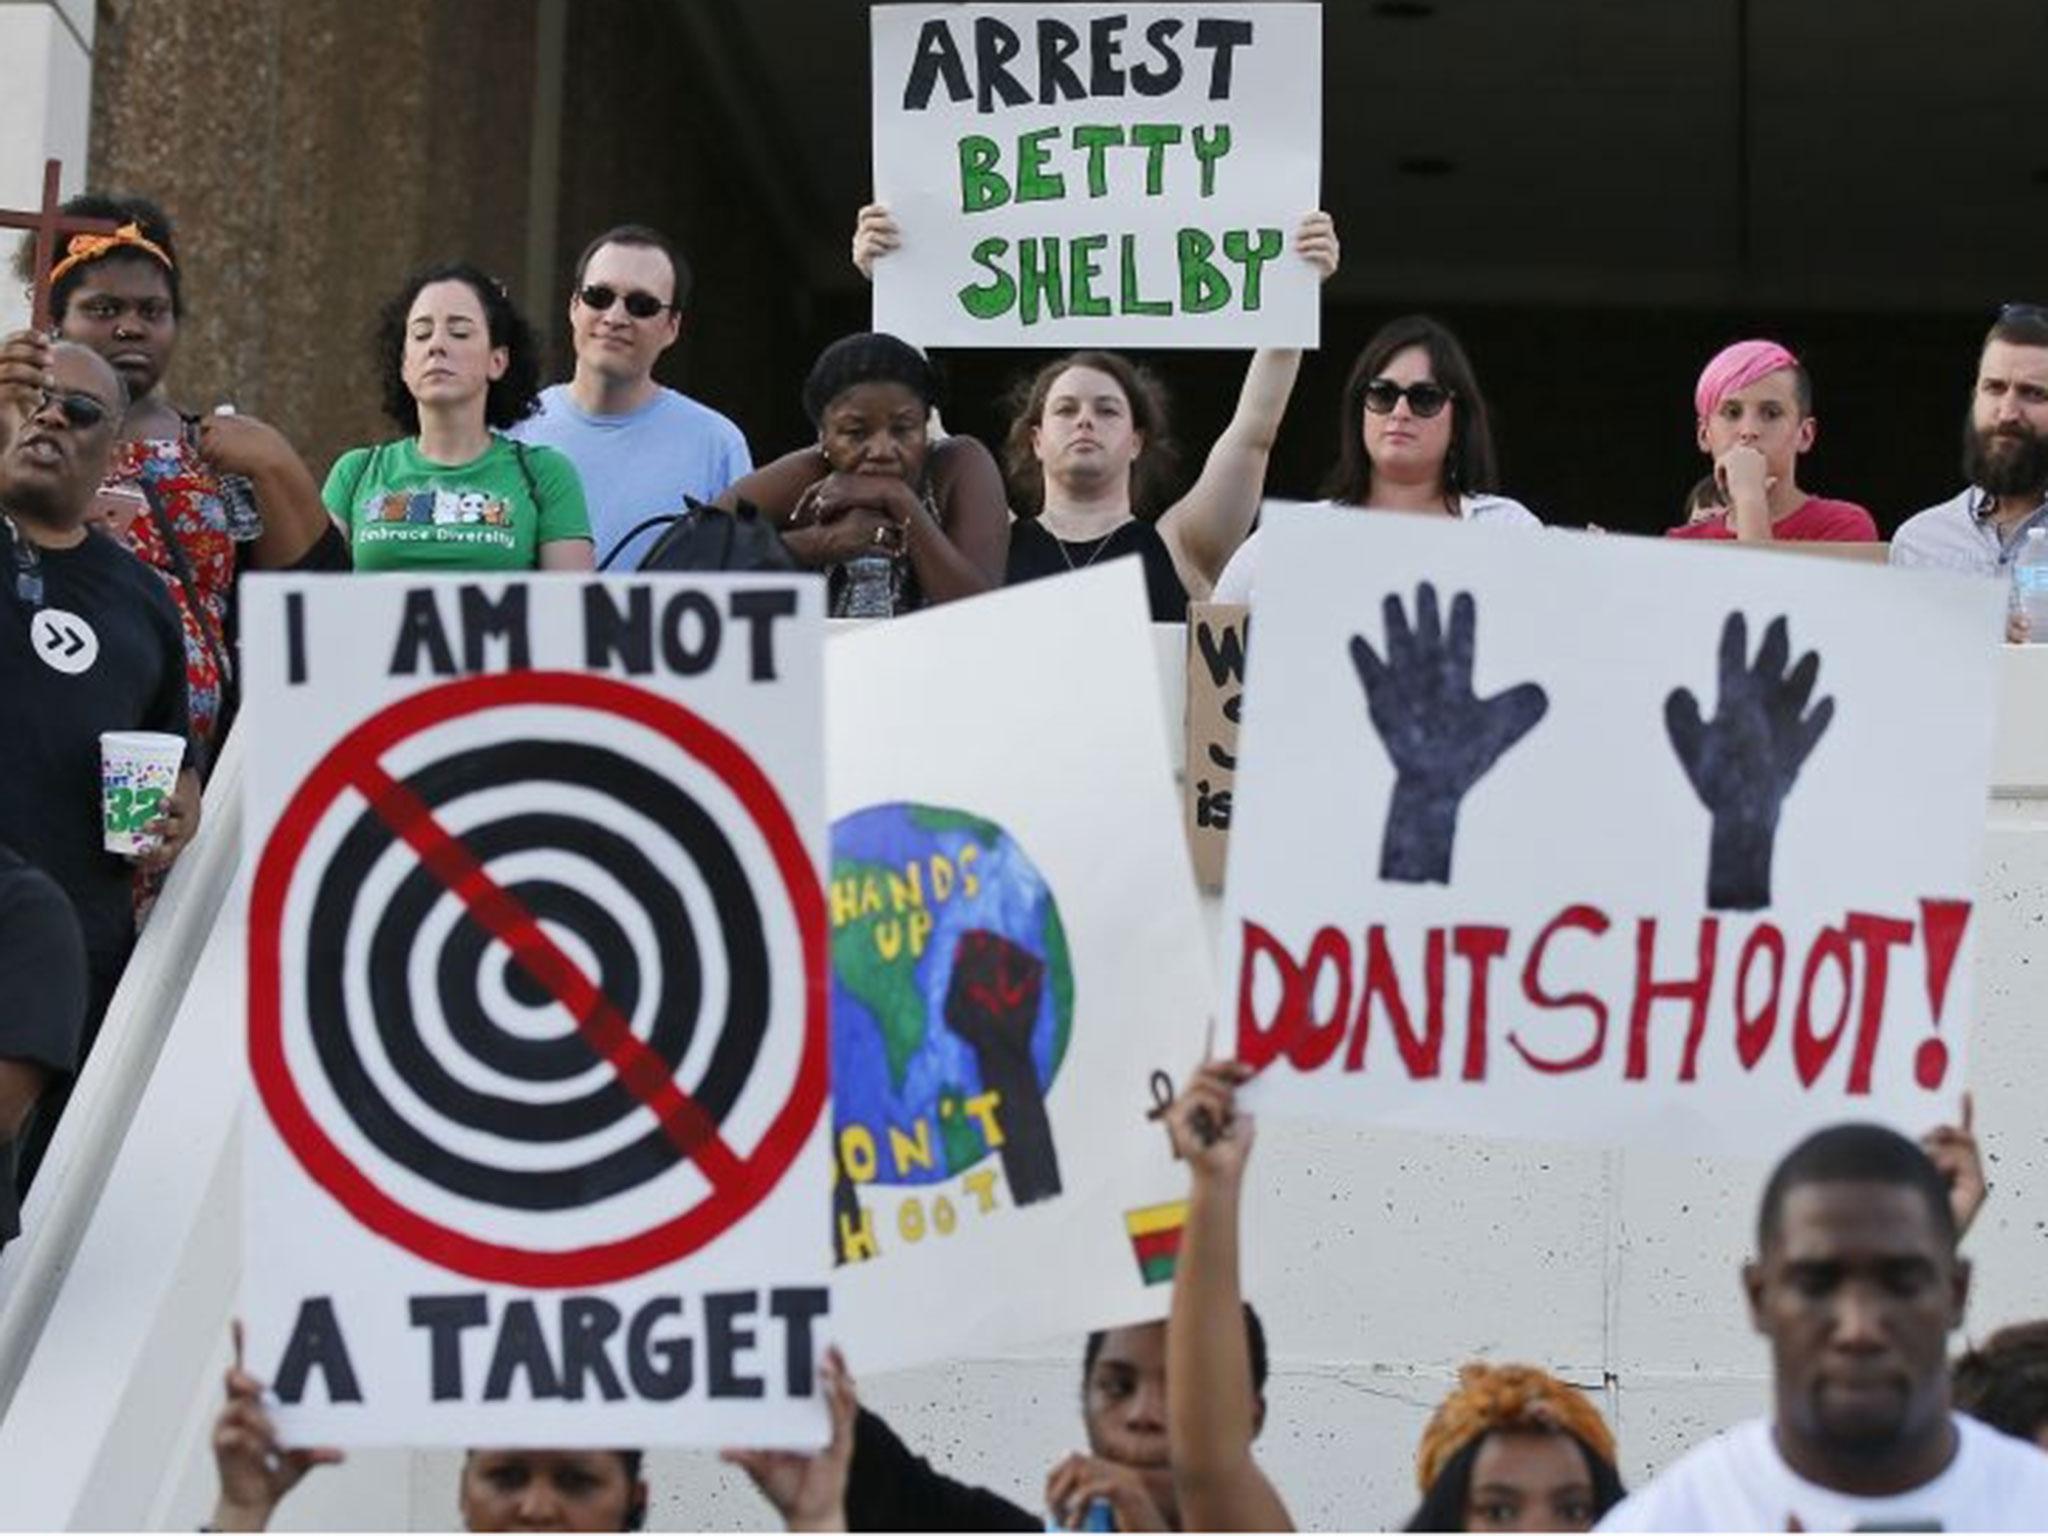 People hold signs at a 'protest for justice' over the shooting of Terence Crutcher, sponsored by We the People Oklahoma, in Tulsa, Oklahoma, 20 September, 2016